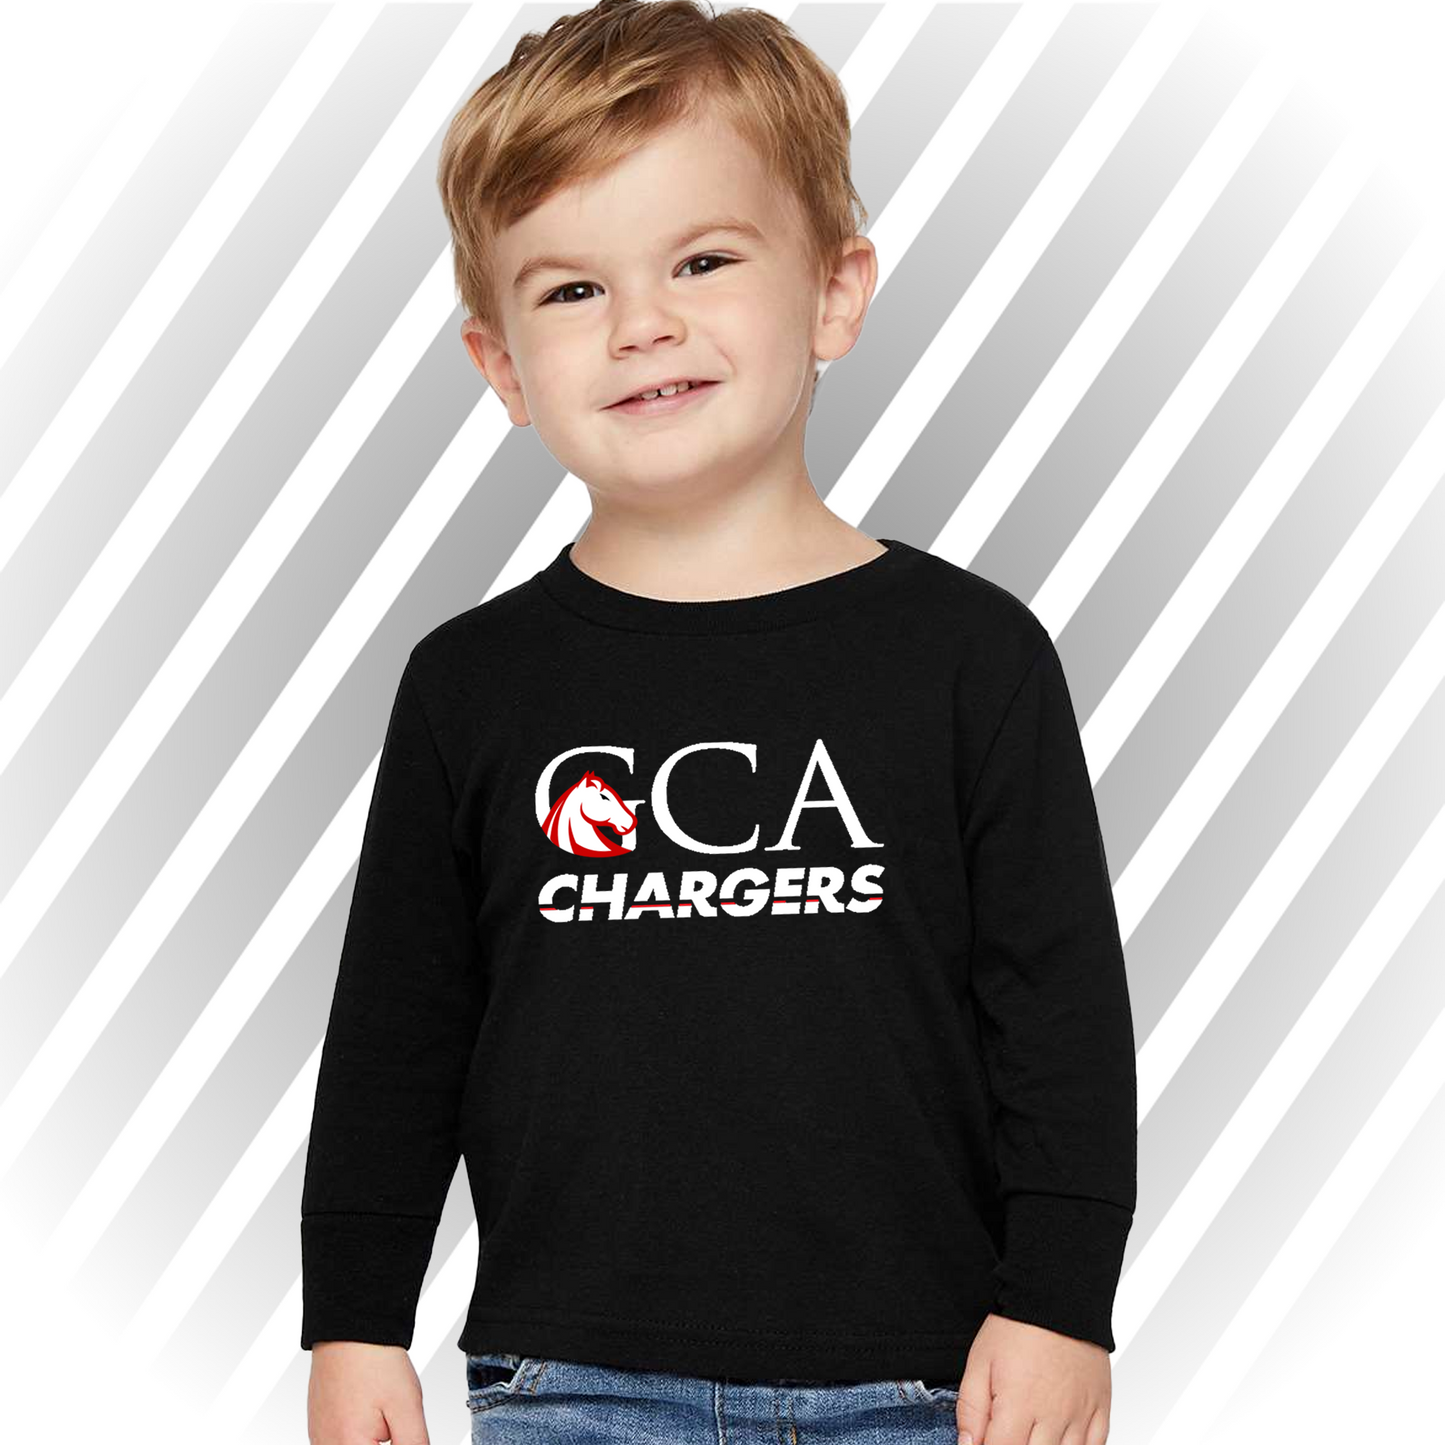 GCA Chargers - Toddler Long Sleeve